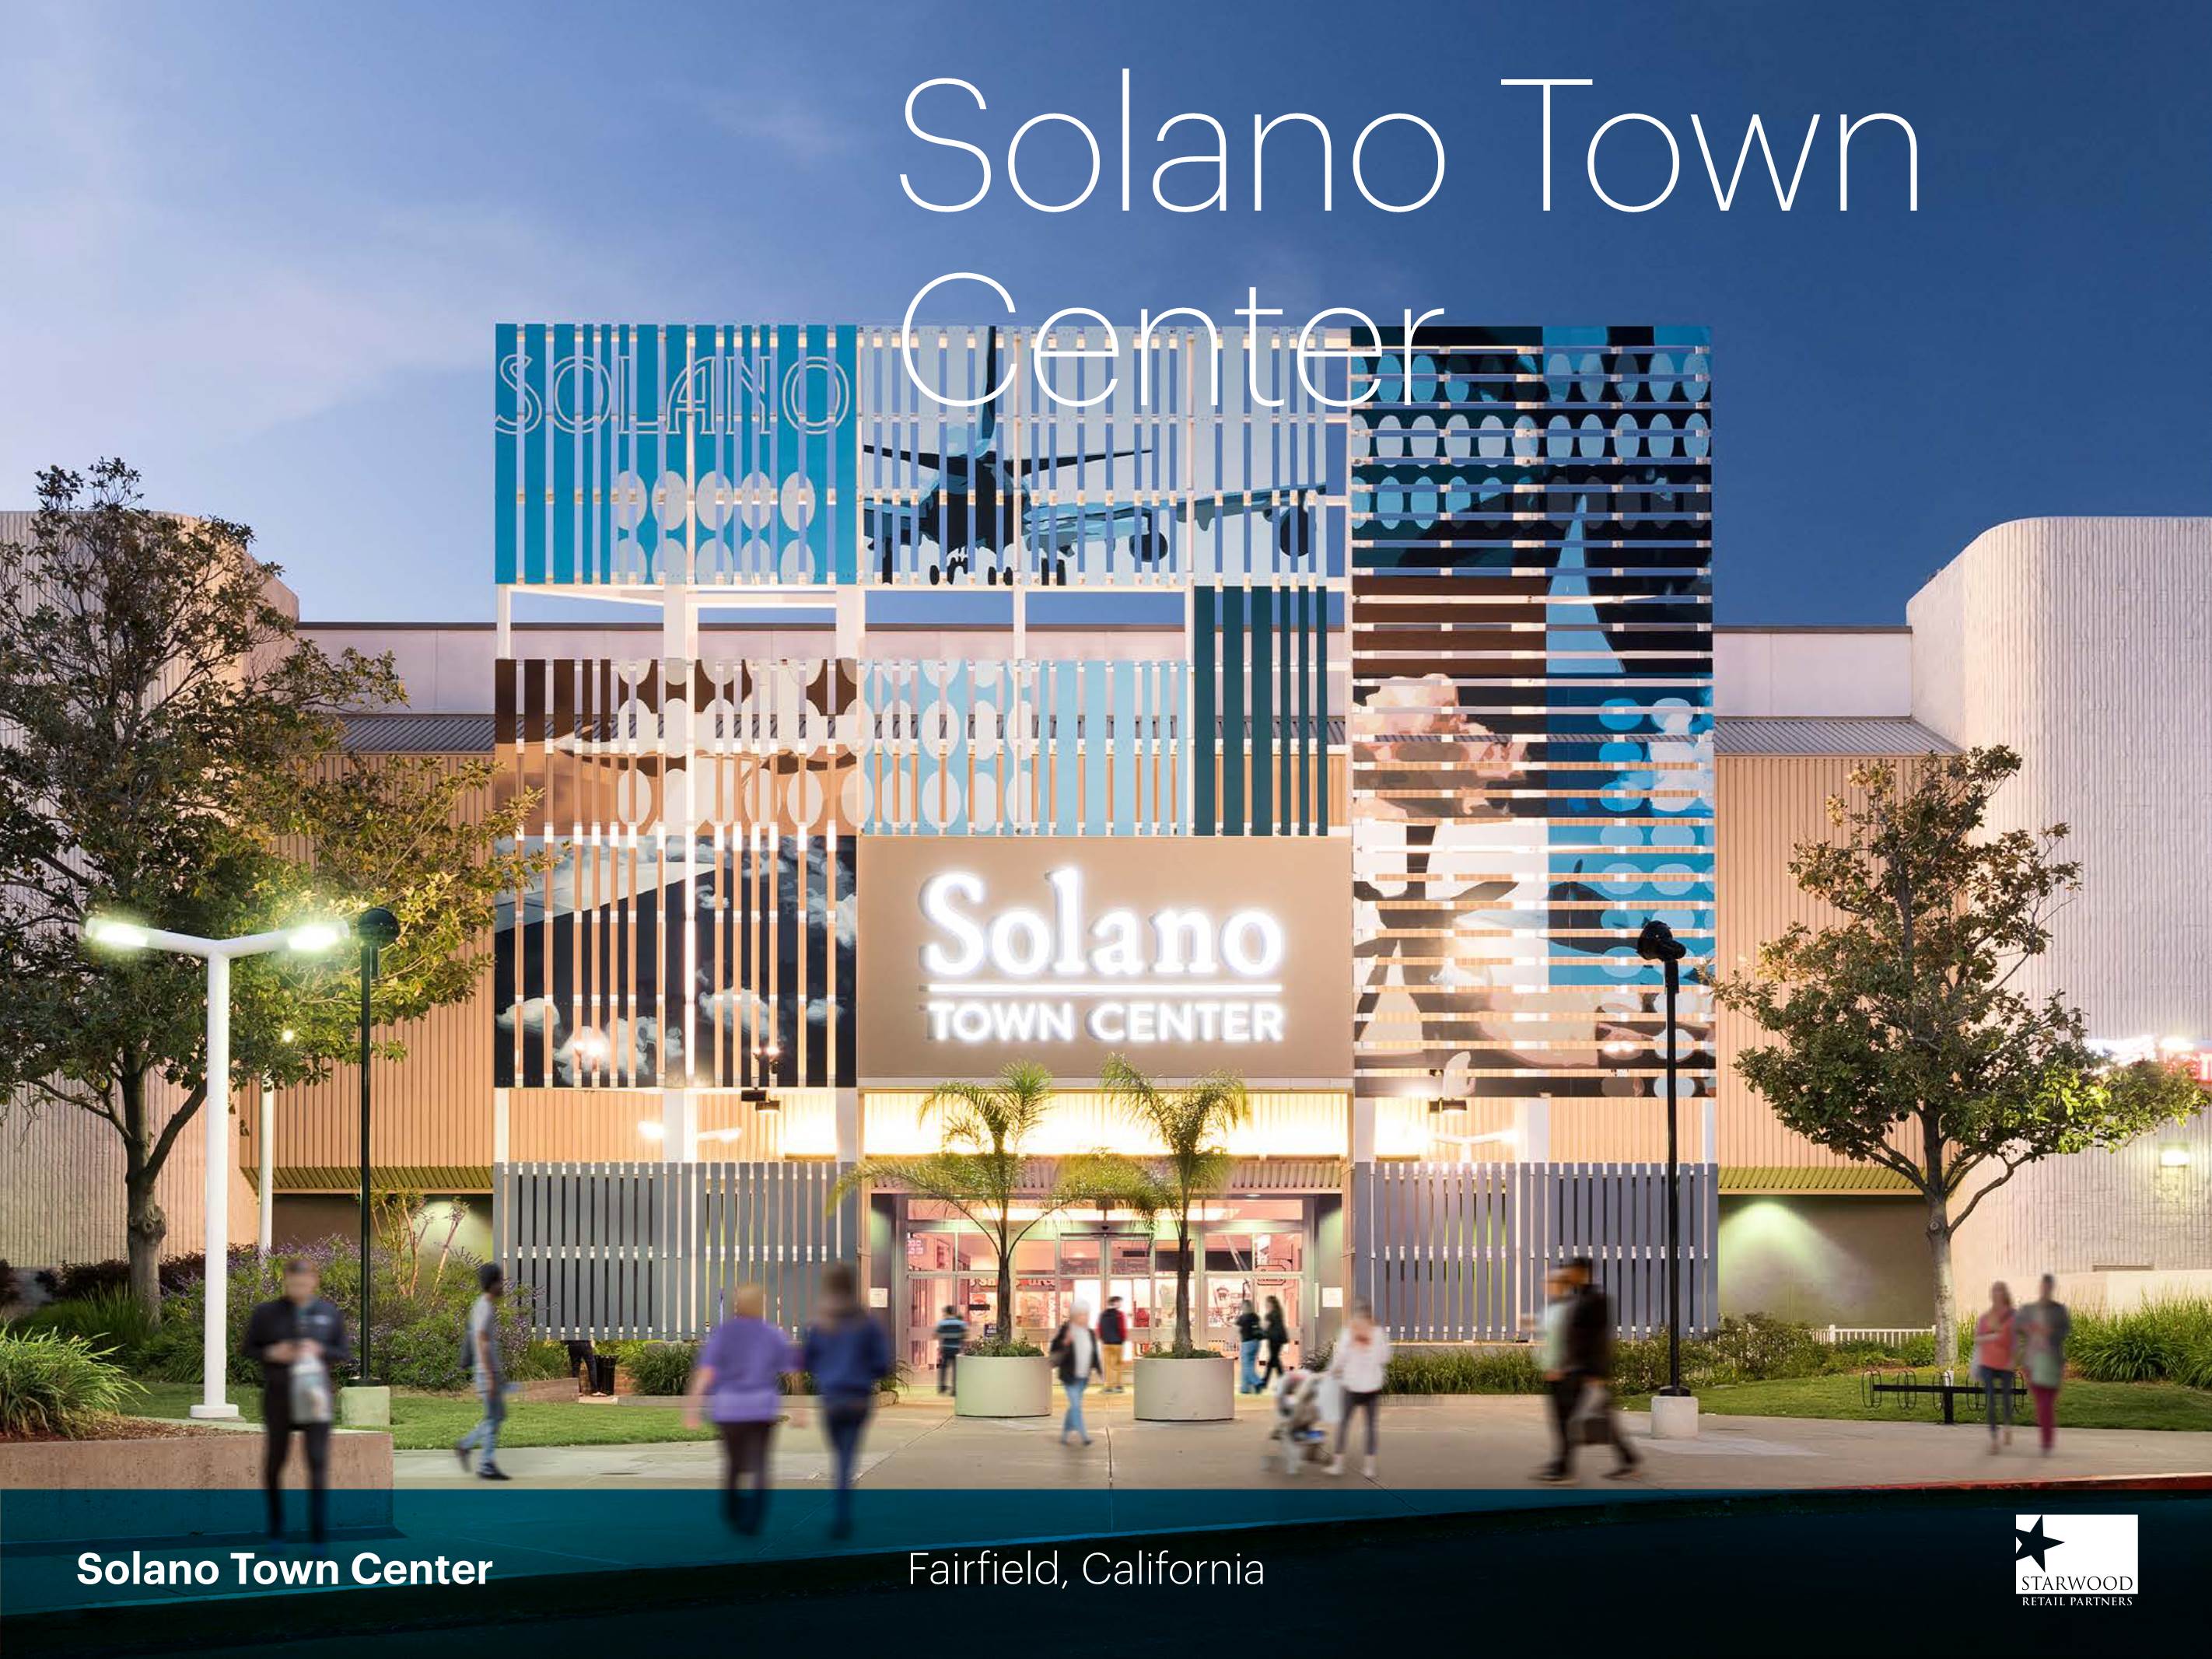 Solano Town Center Fairfield, California a Community’S Gathering Place in the Heart of California Wine County DAVIS, CA